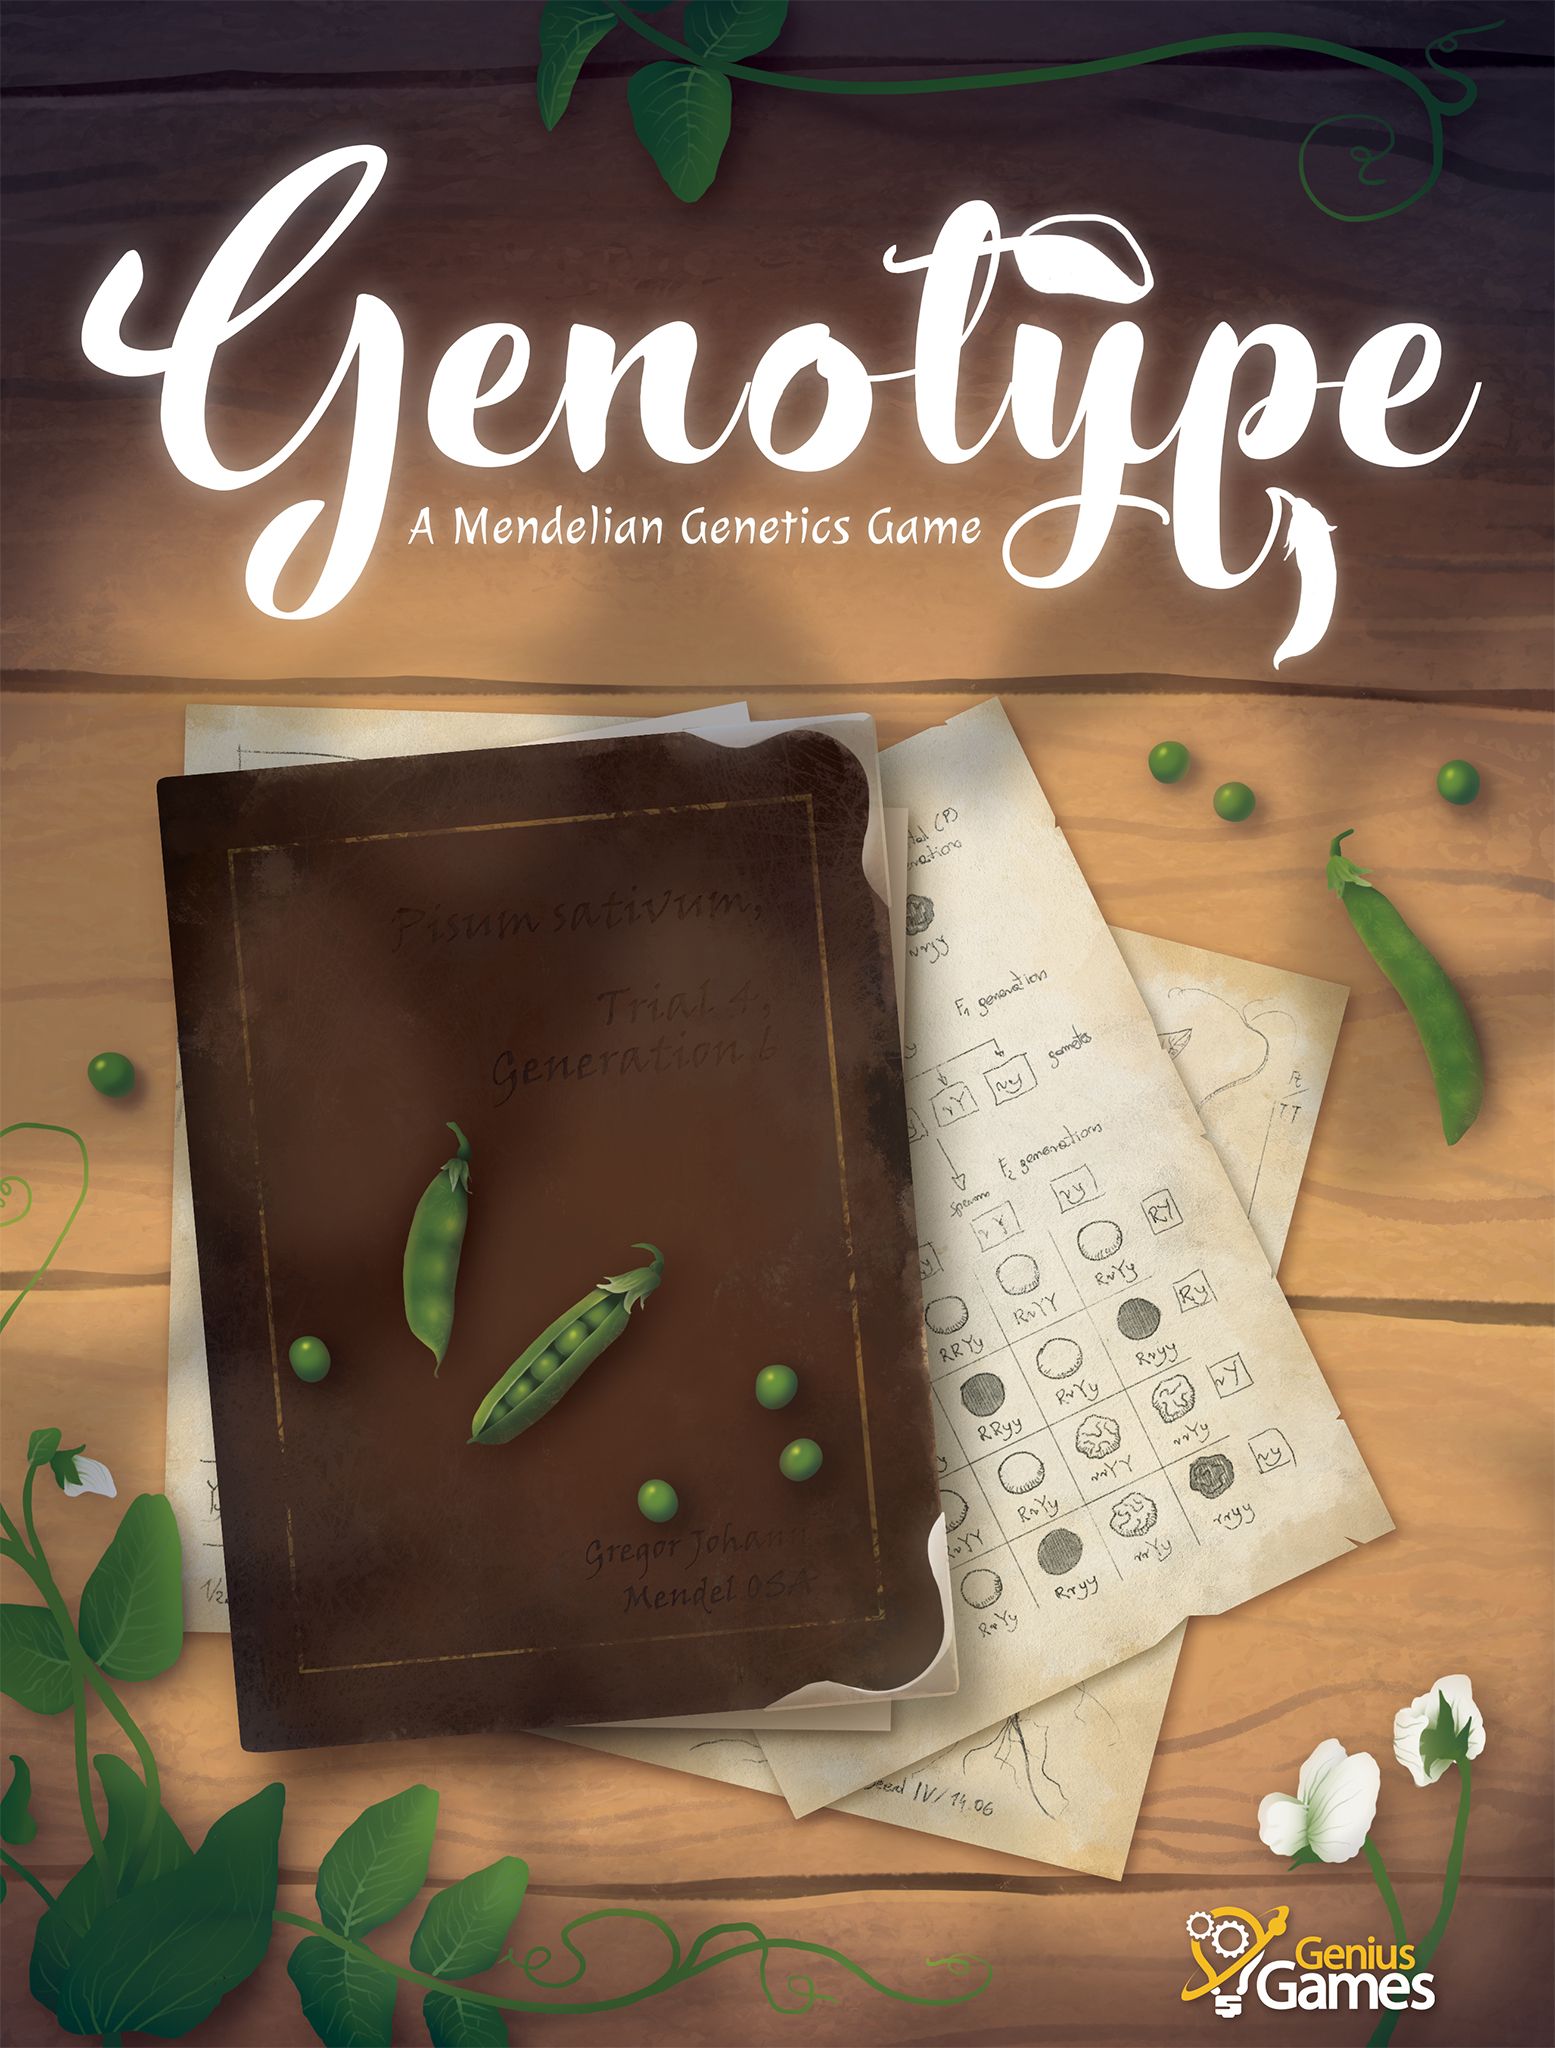 cover art for the board game 'genotype' which features an illustration of an old timey notebook some papers, and peas and peapods scattered around them